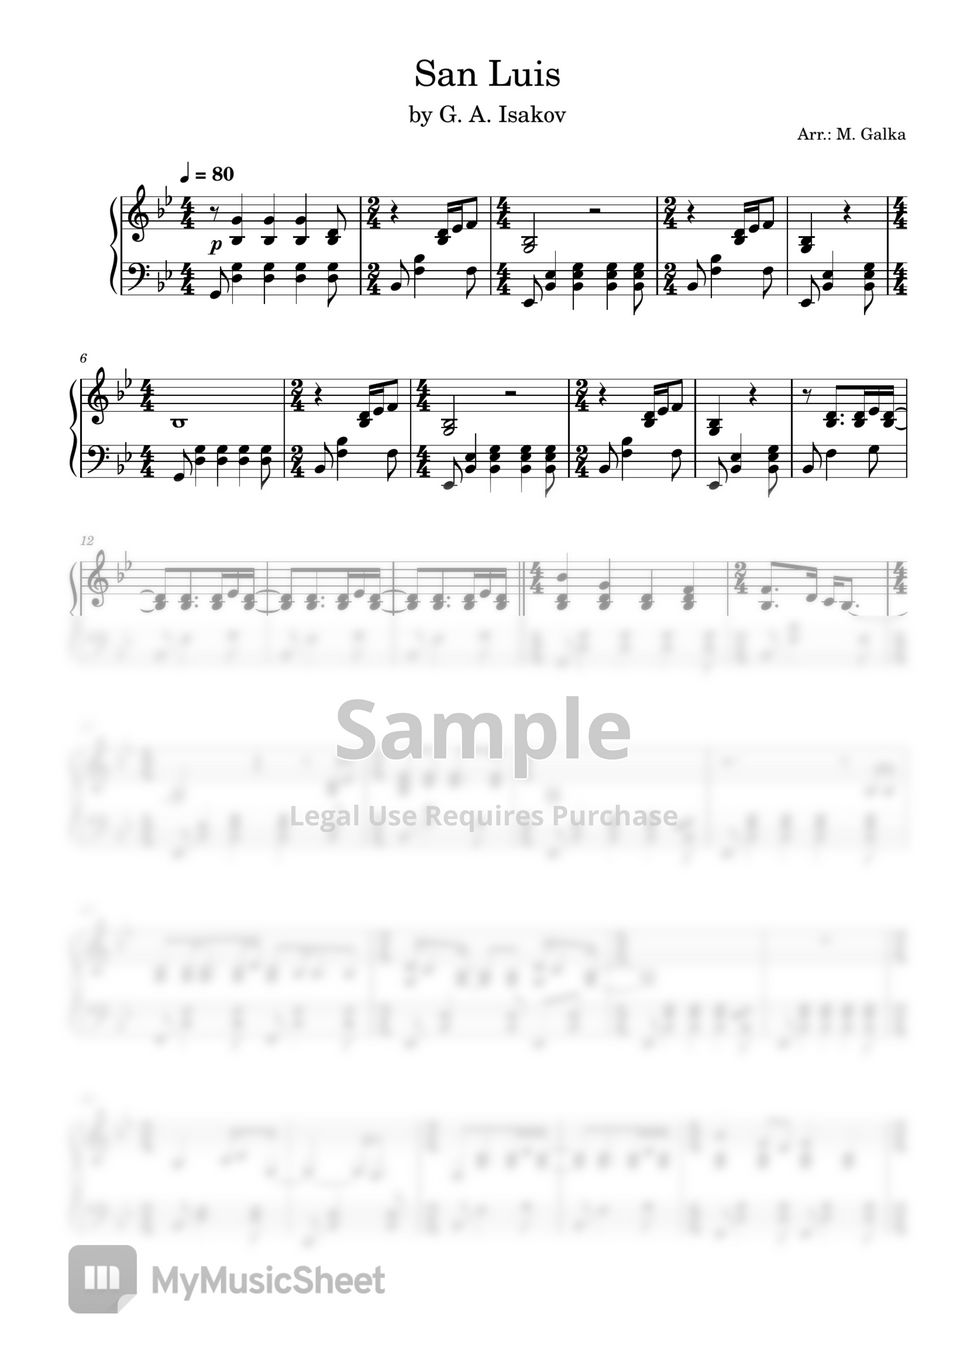 Saint Louis Armstrong Beach - Collection / Songbook - Sheet Music